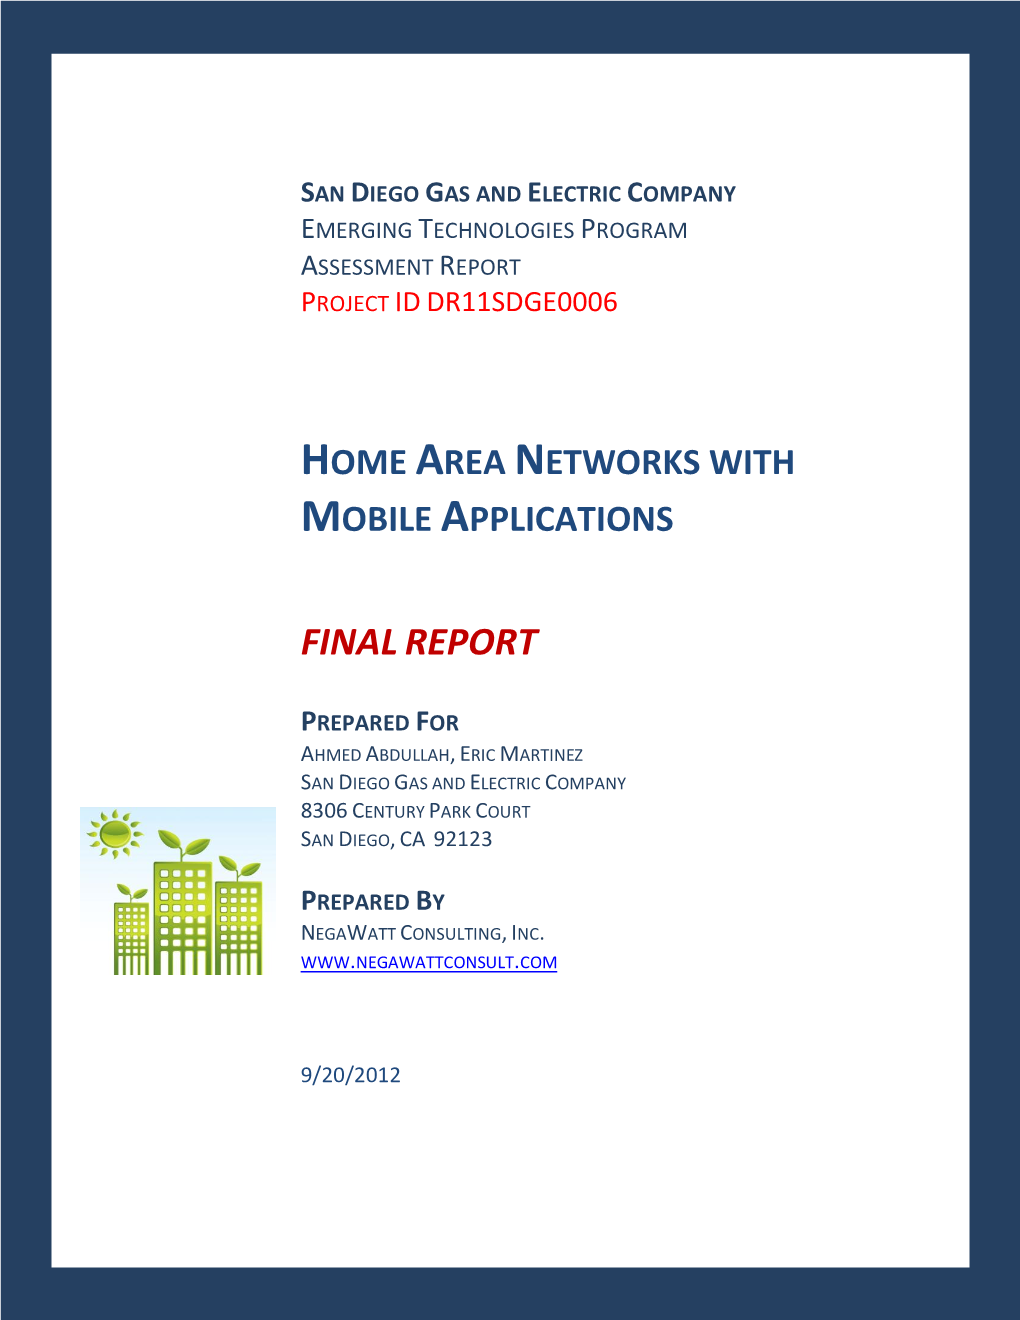 Home Area Networks with Mobile Applications Consulting